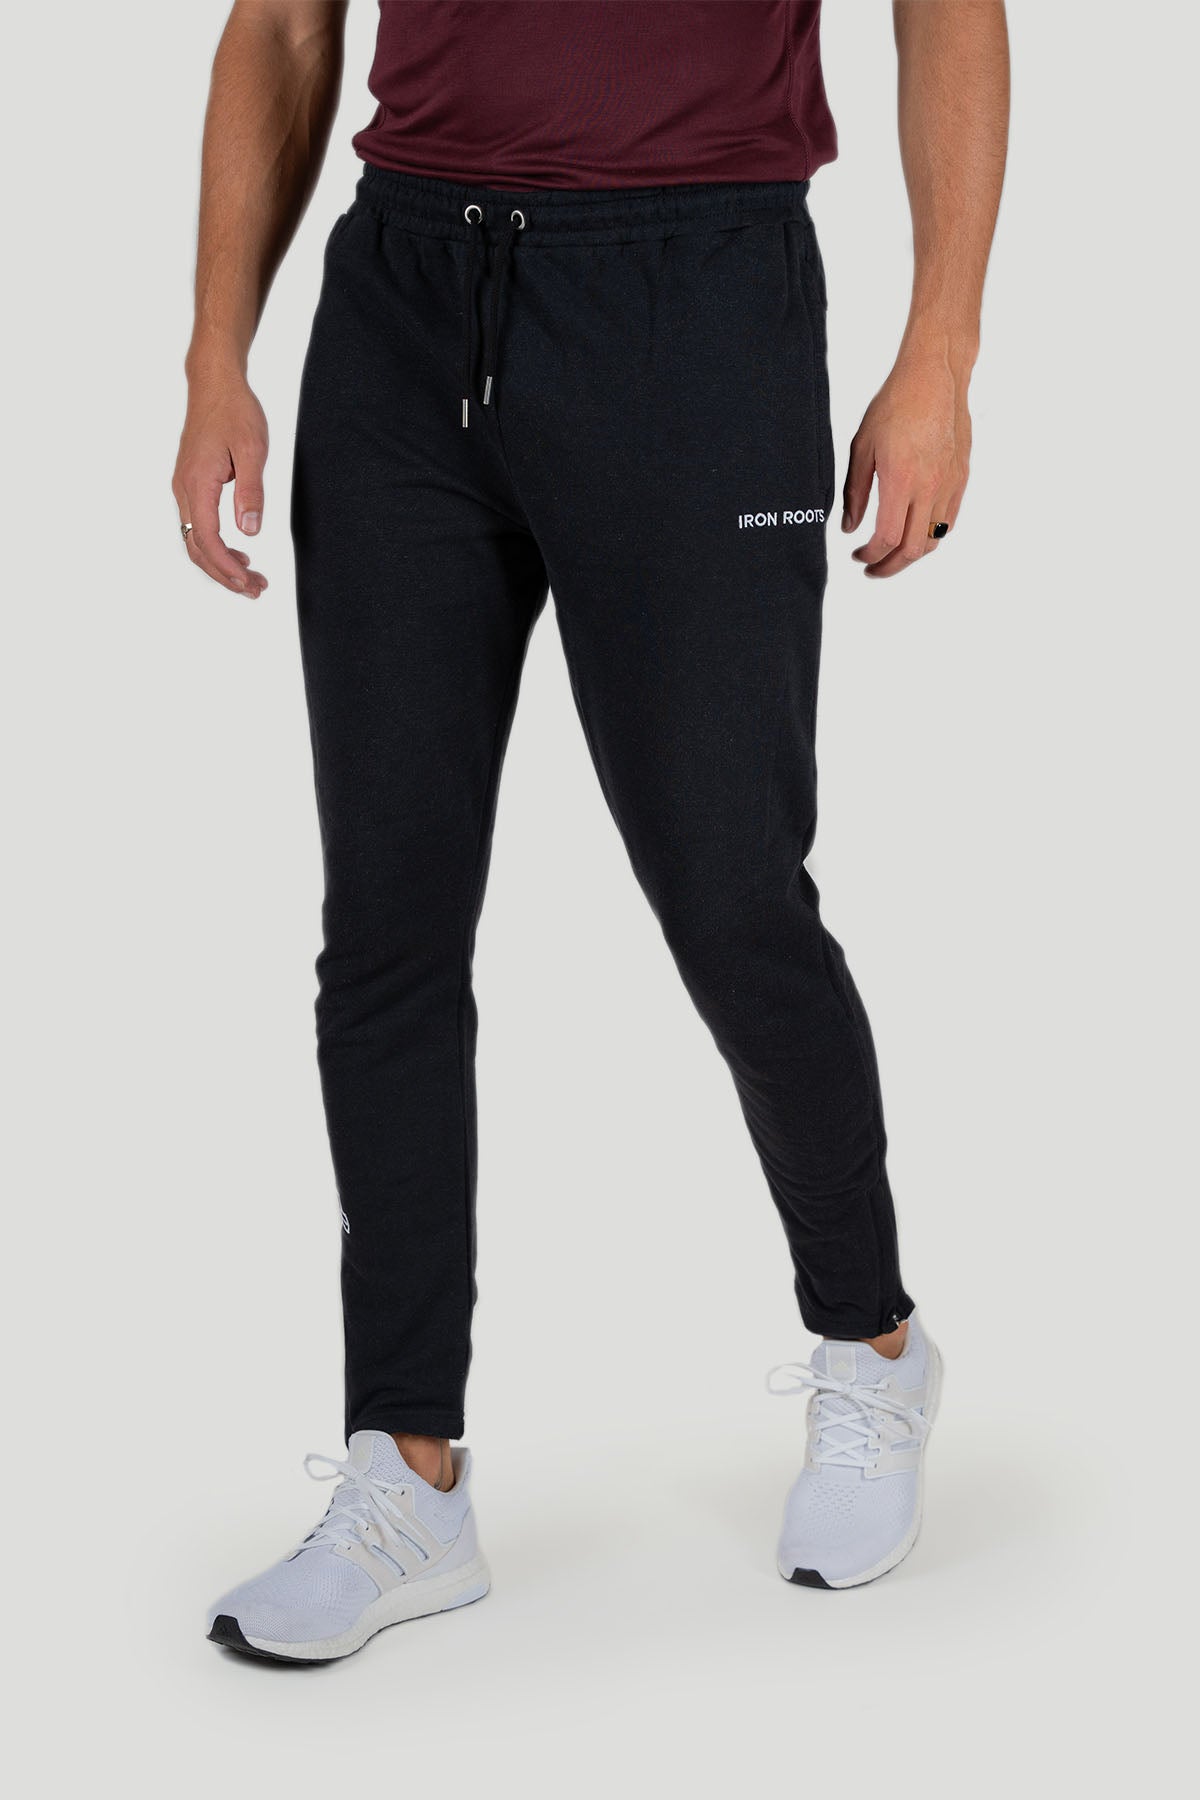 Alphalete Sweater and Joggers Review – Writers Lift Too